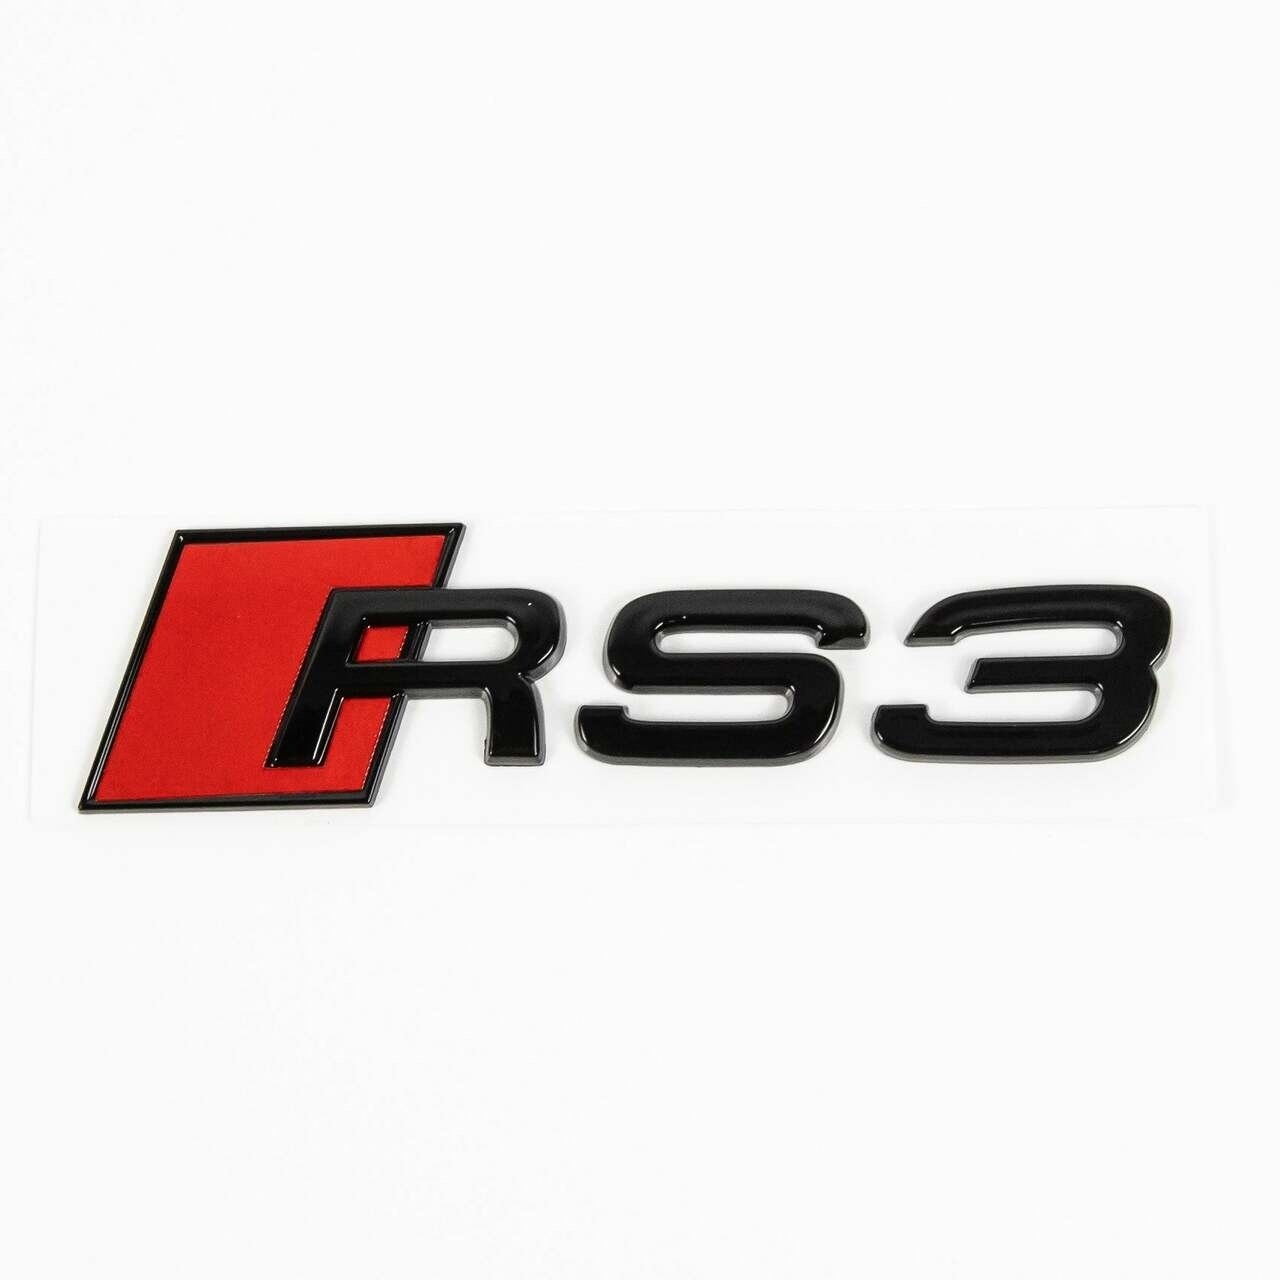 Audi RS3 black replacement rear boot trunk badge emblem adhesive stick on